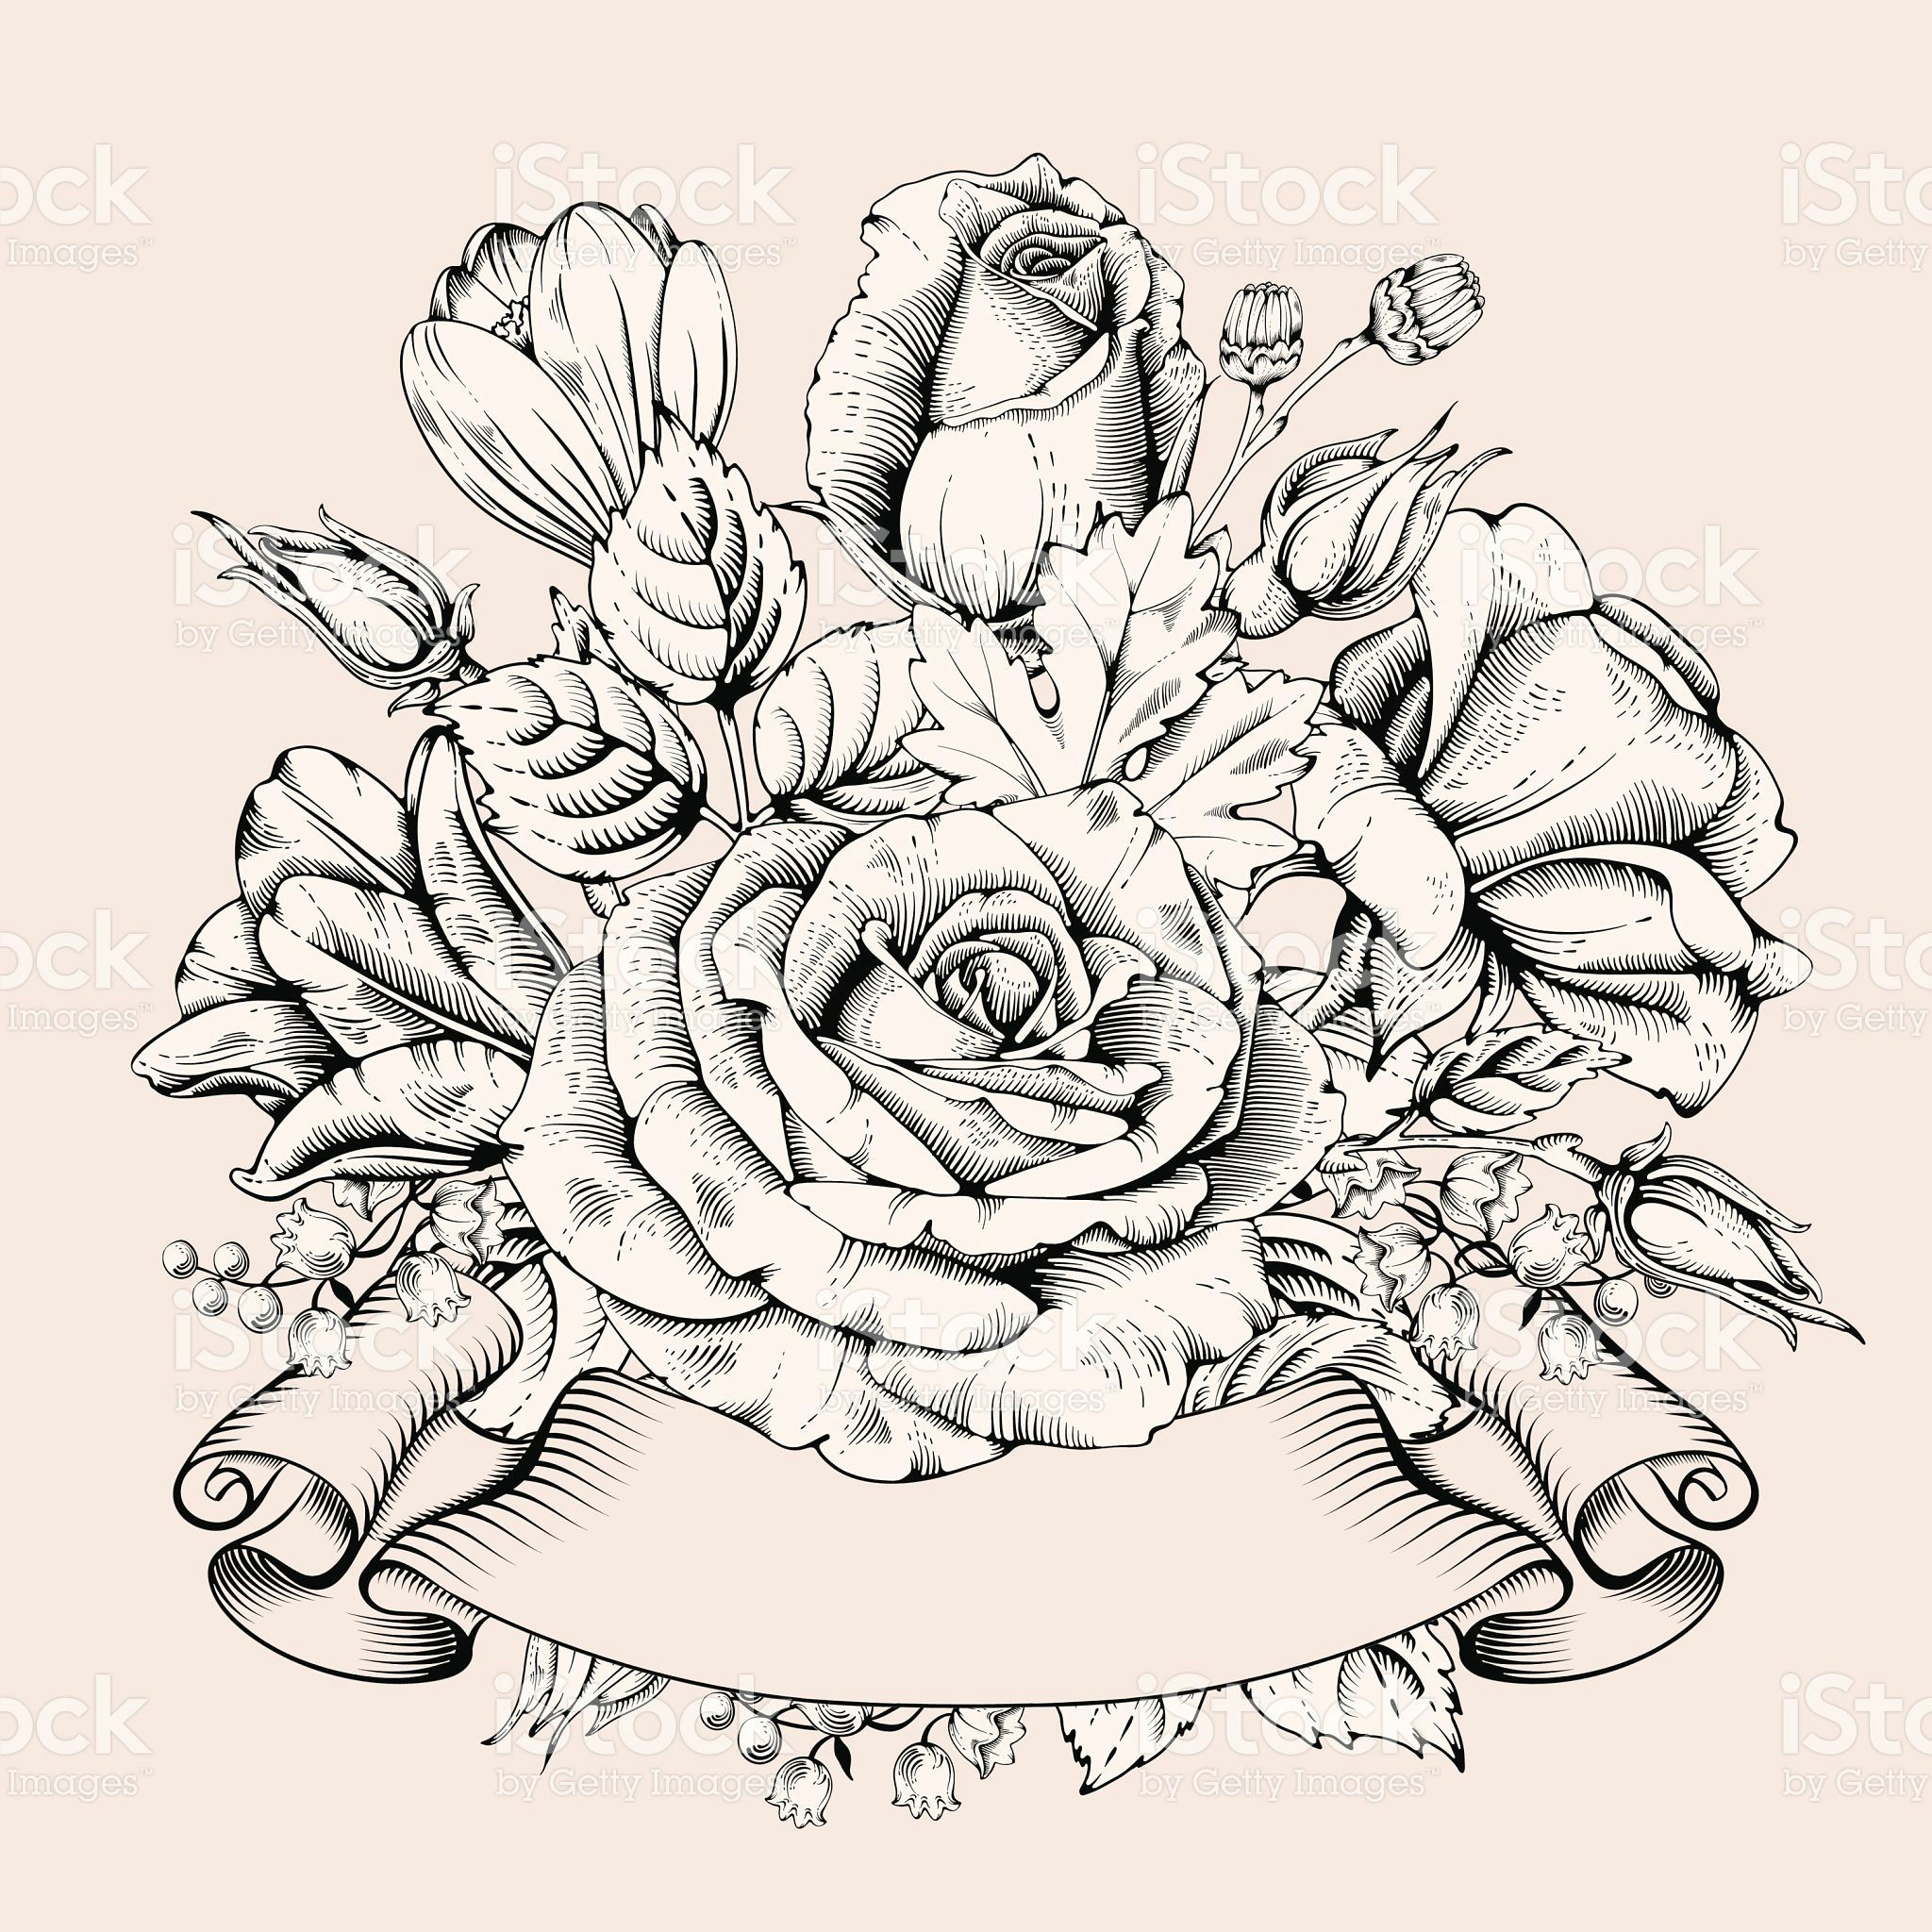 Drawings Of Flowers and Roses Vintage Luxury Card with Detailed Hand Drawn Flowers Blooming Rose